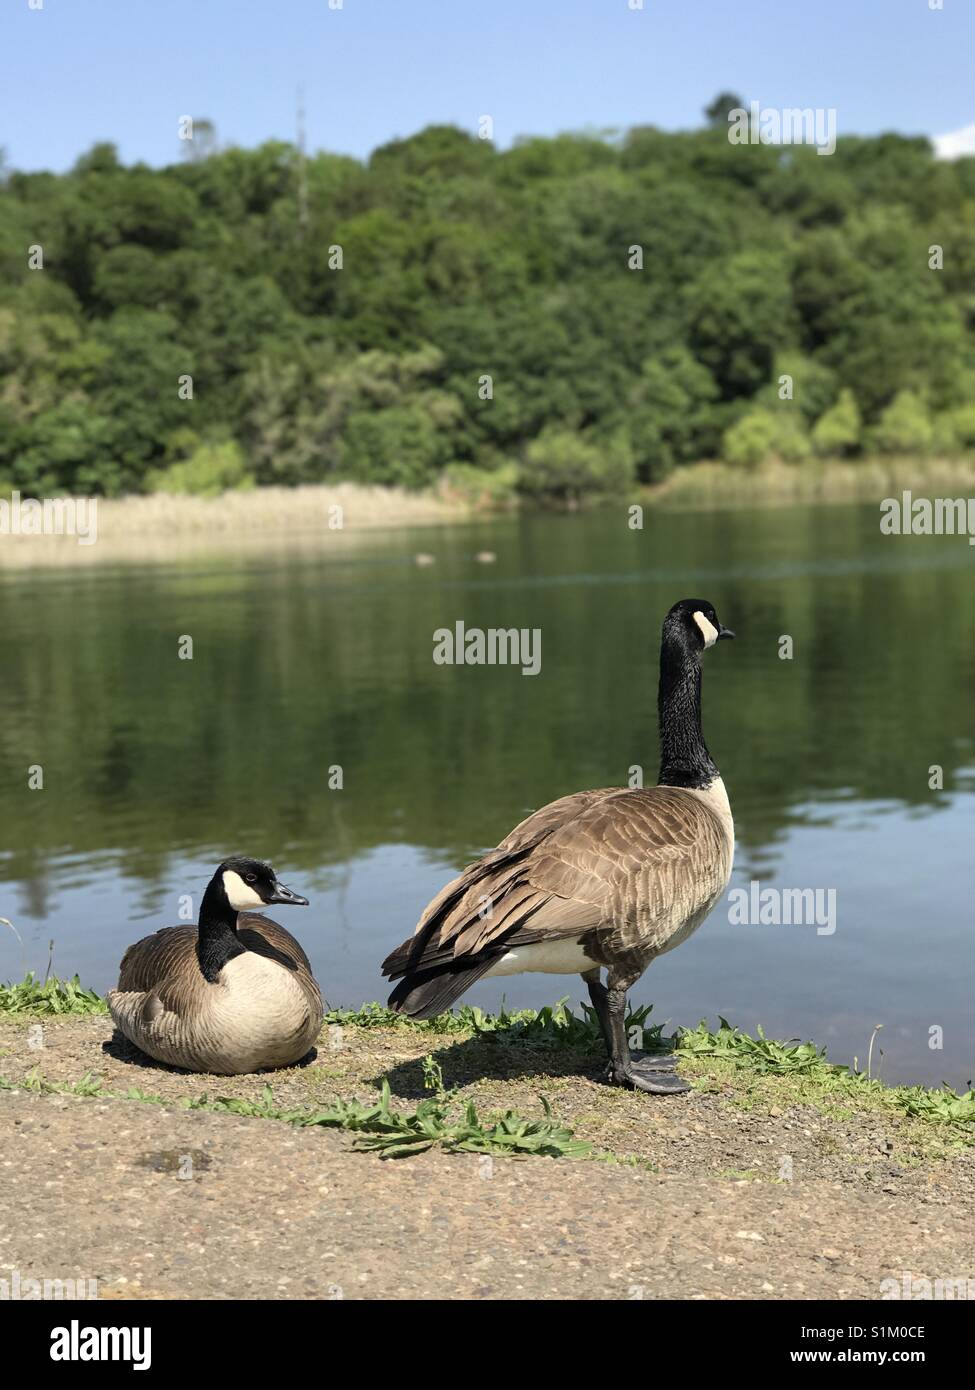 Canadian geese at a lake Stock Photo